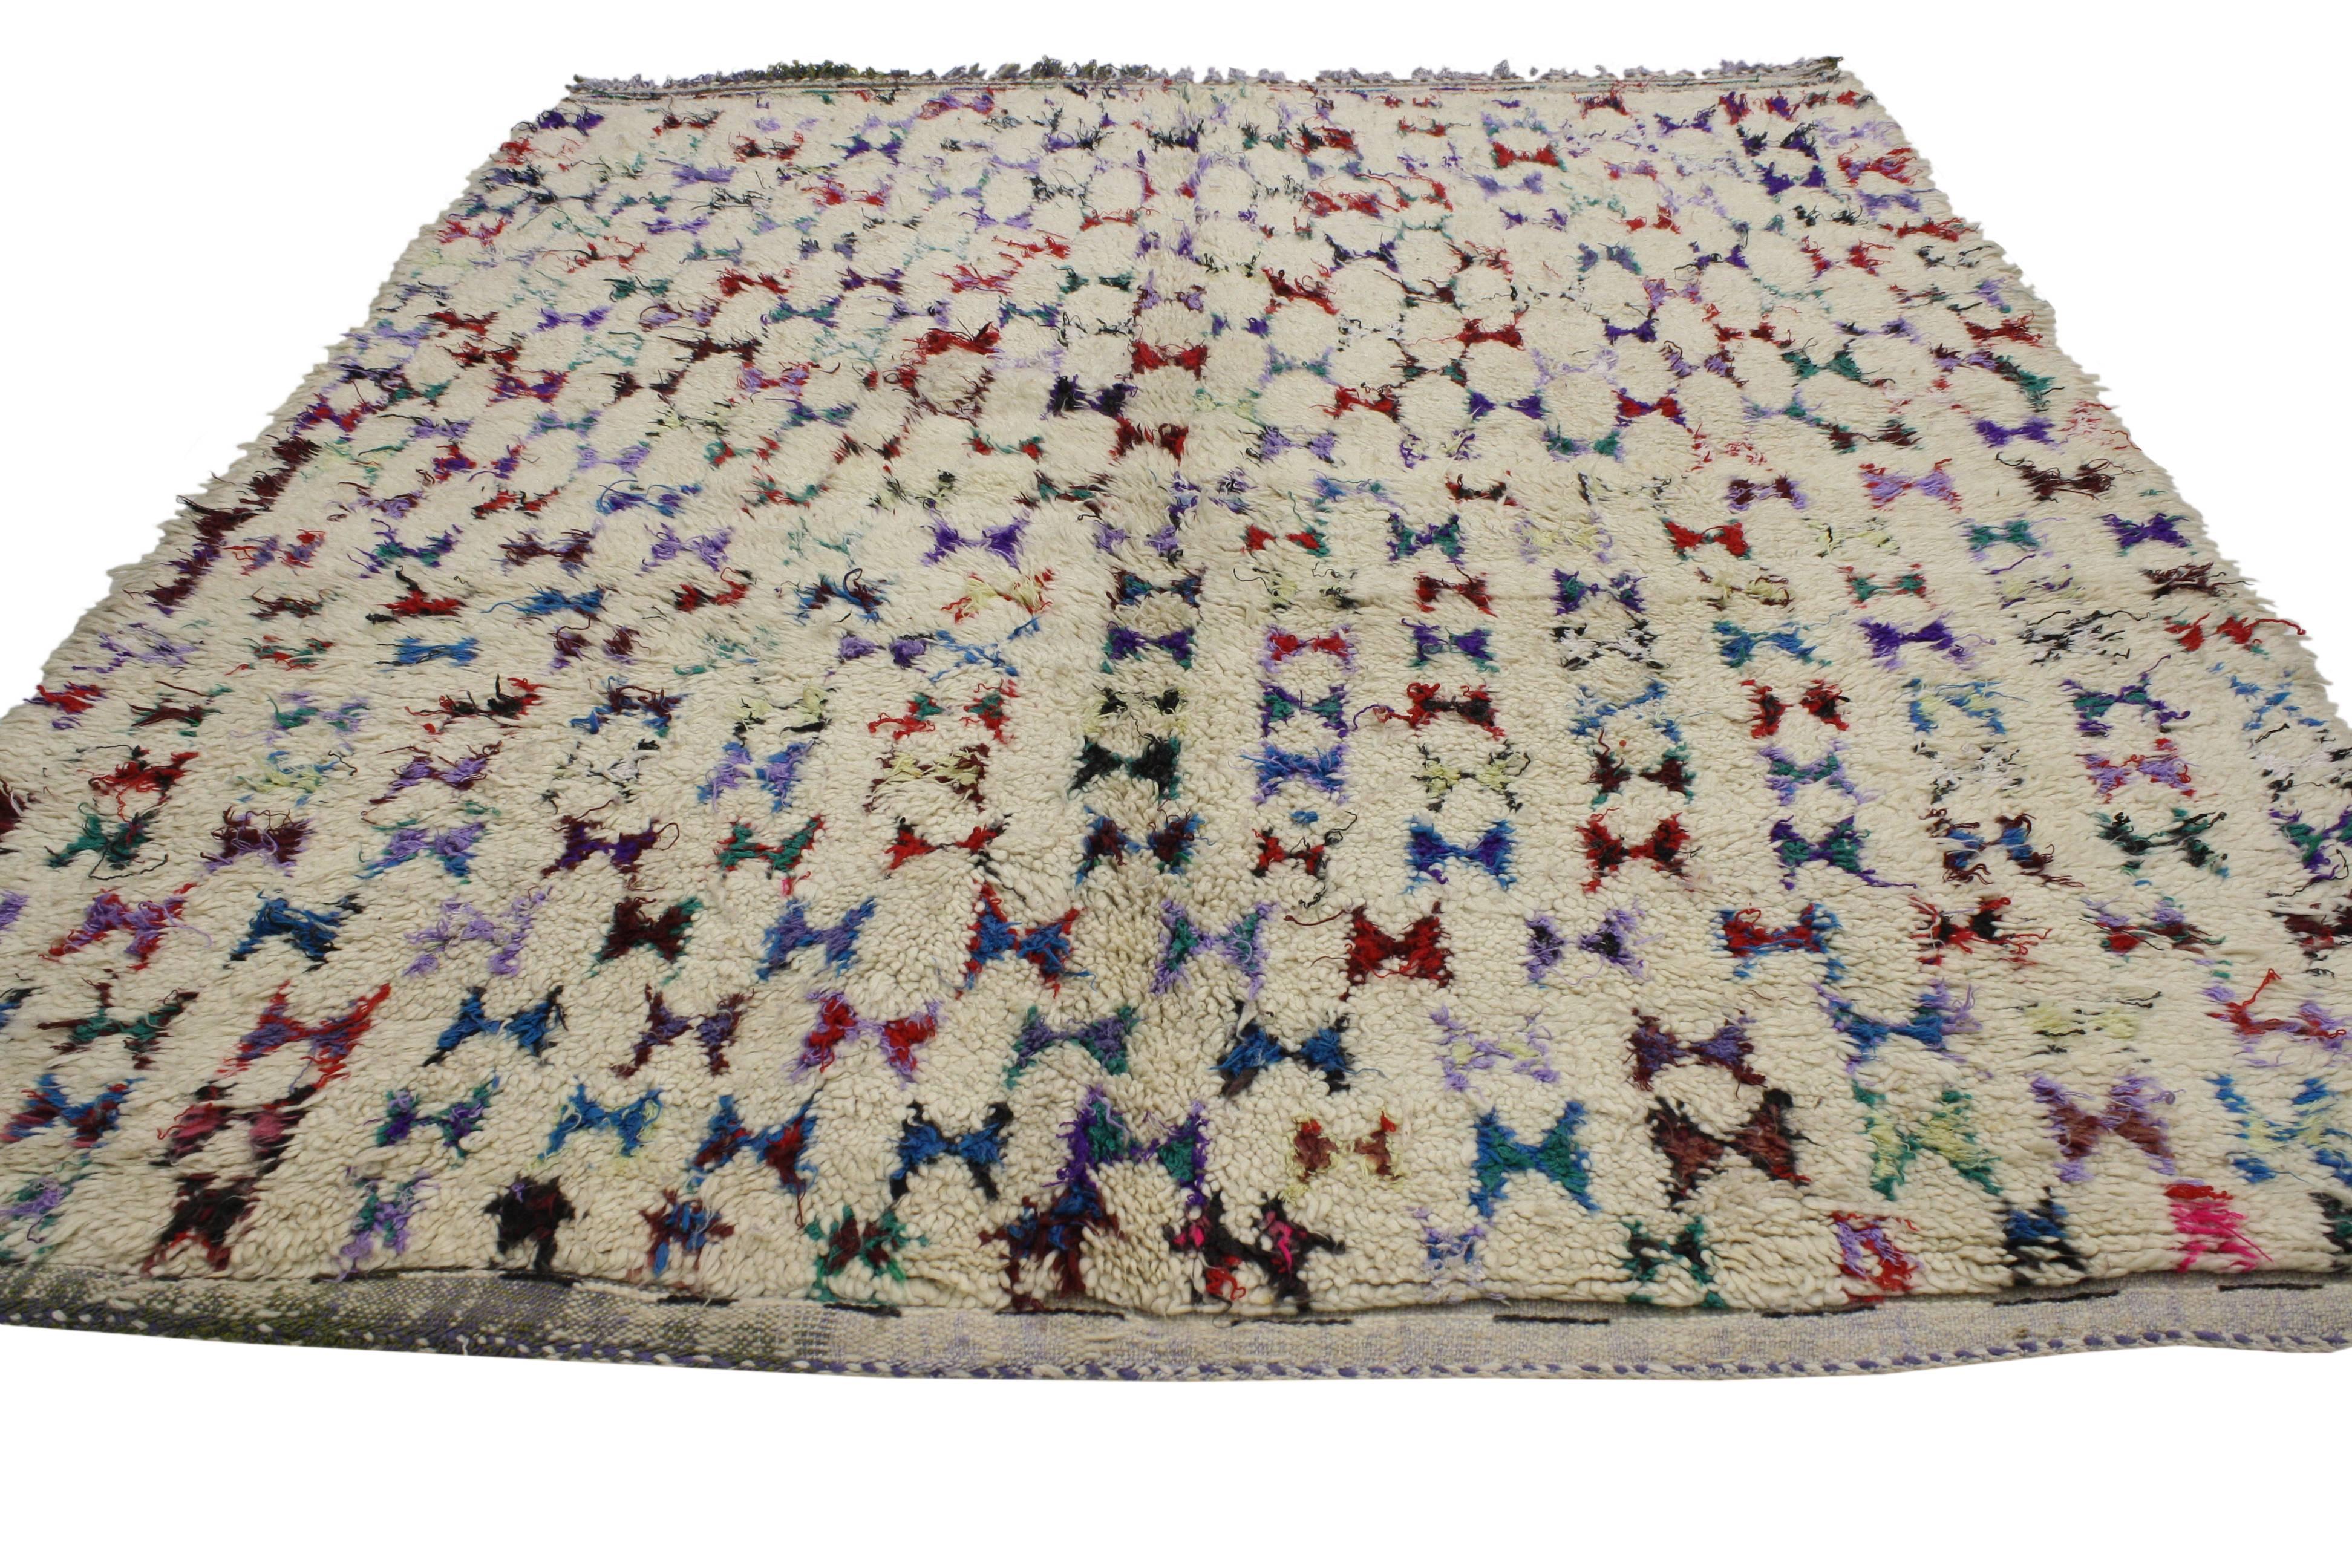 Tribal Vintage Berber Moroccan Azilal Rug with Post-Modern Memphis Style